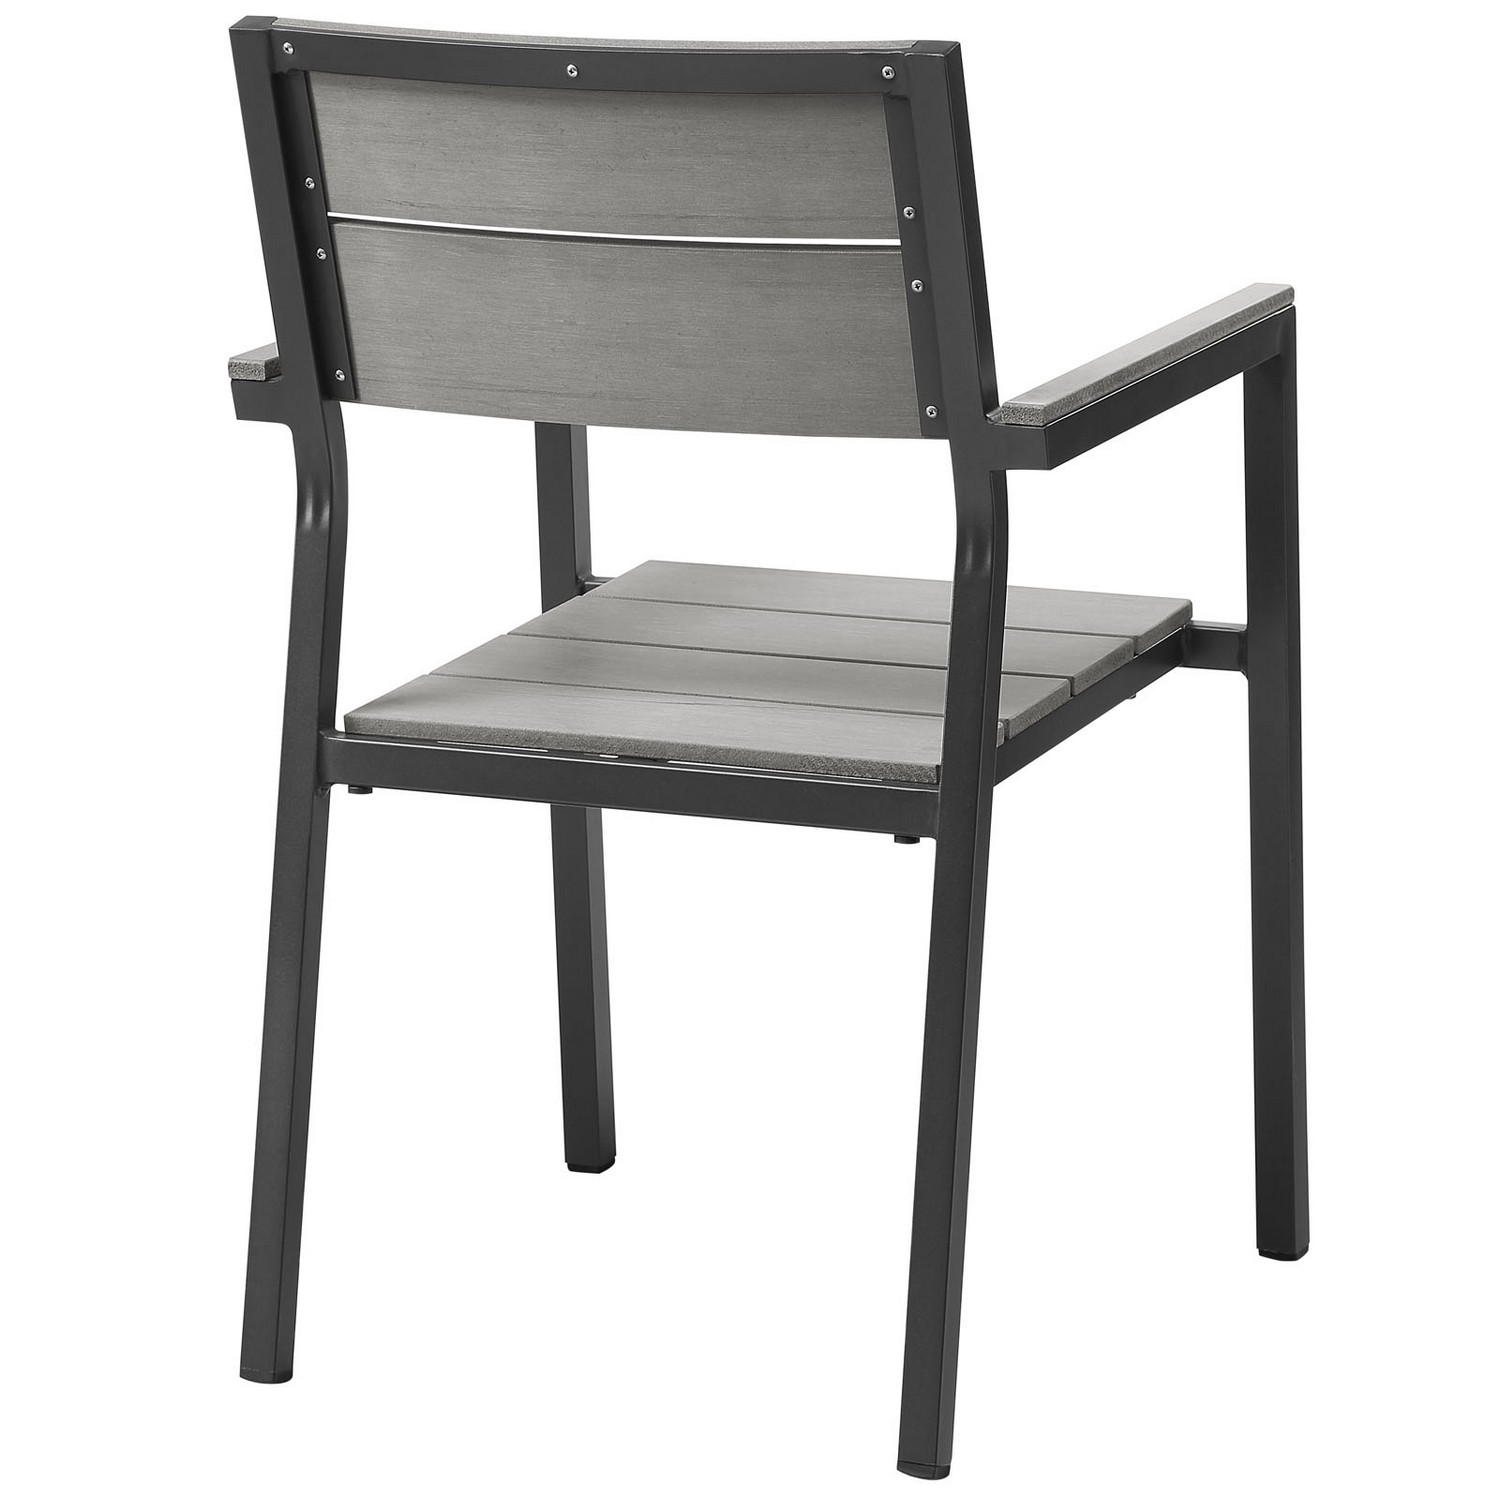 Modway Maine Dining Outdoor Patio Armchair - Brown/Gray